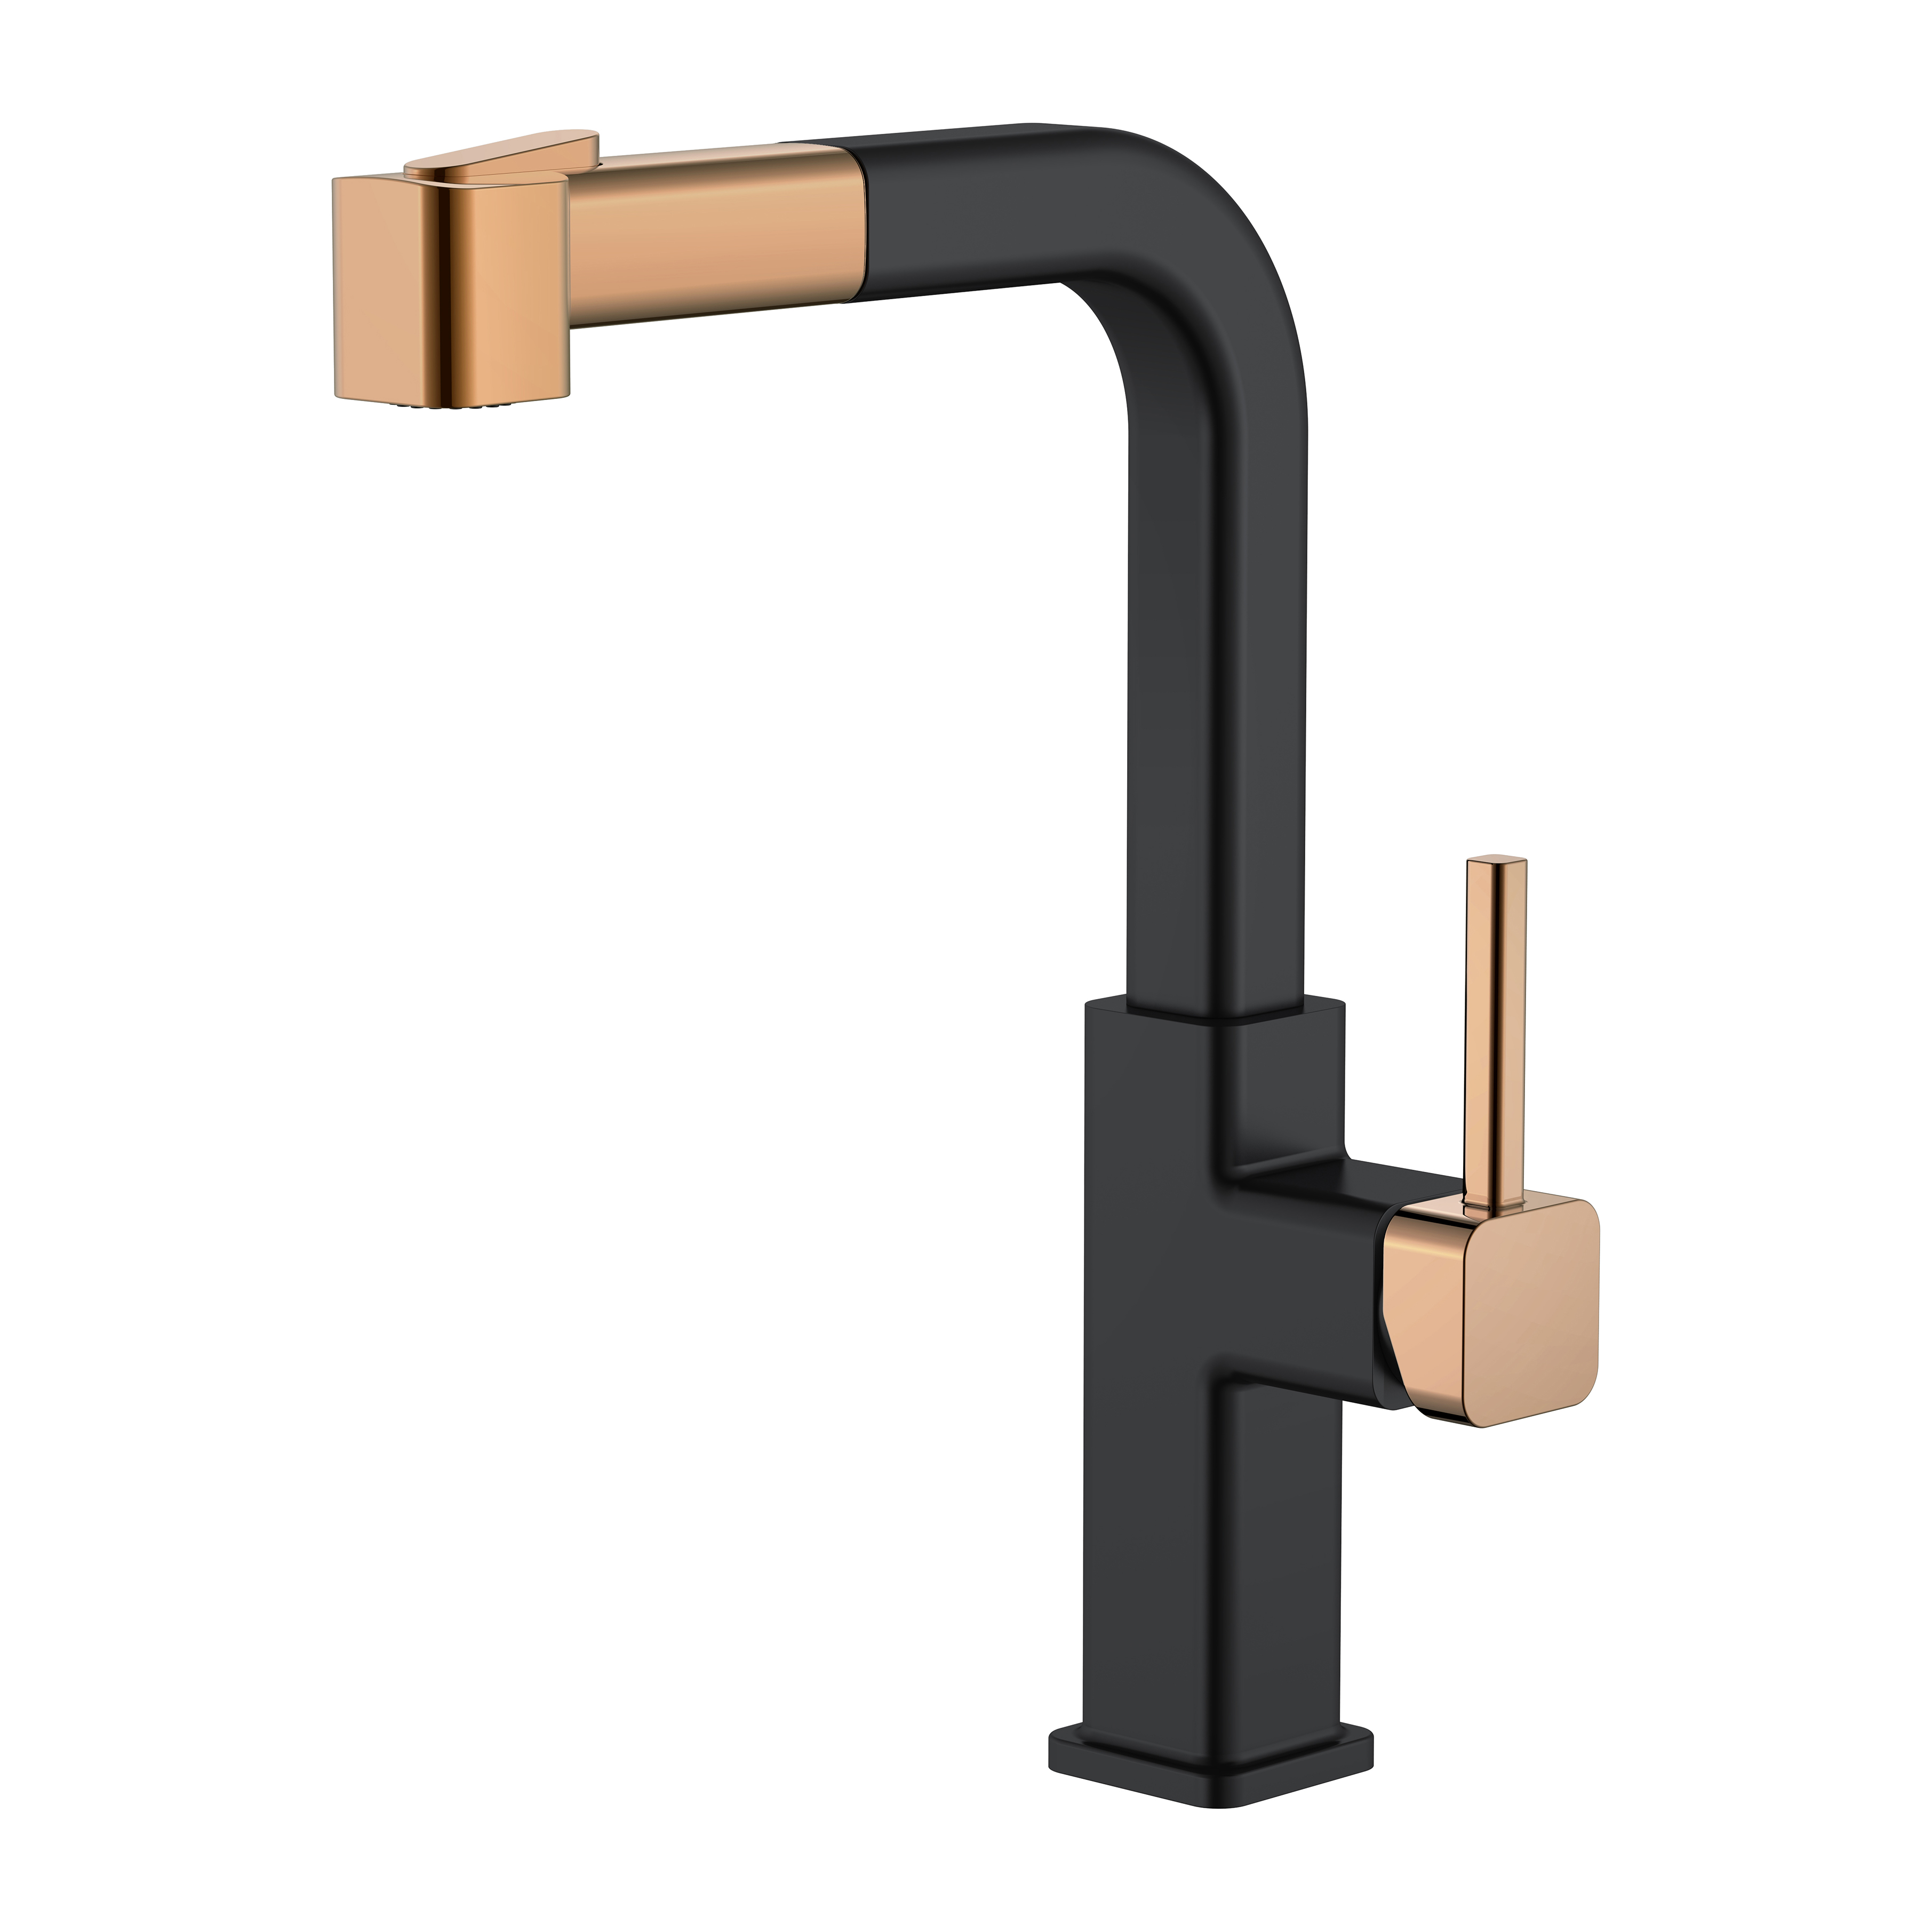 Latest Square Kitchen Faucet Rose Gold Kitchen Faucets Pull Out Modern Kitchen Faucet